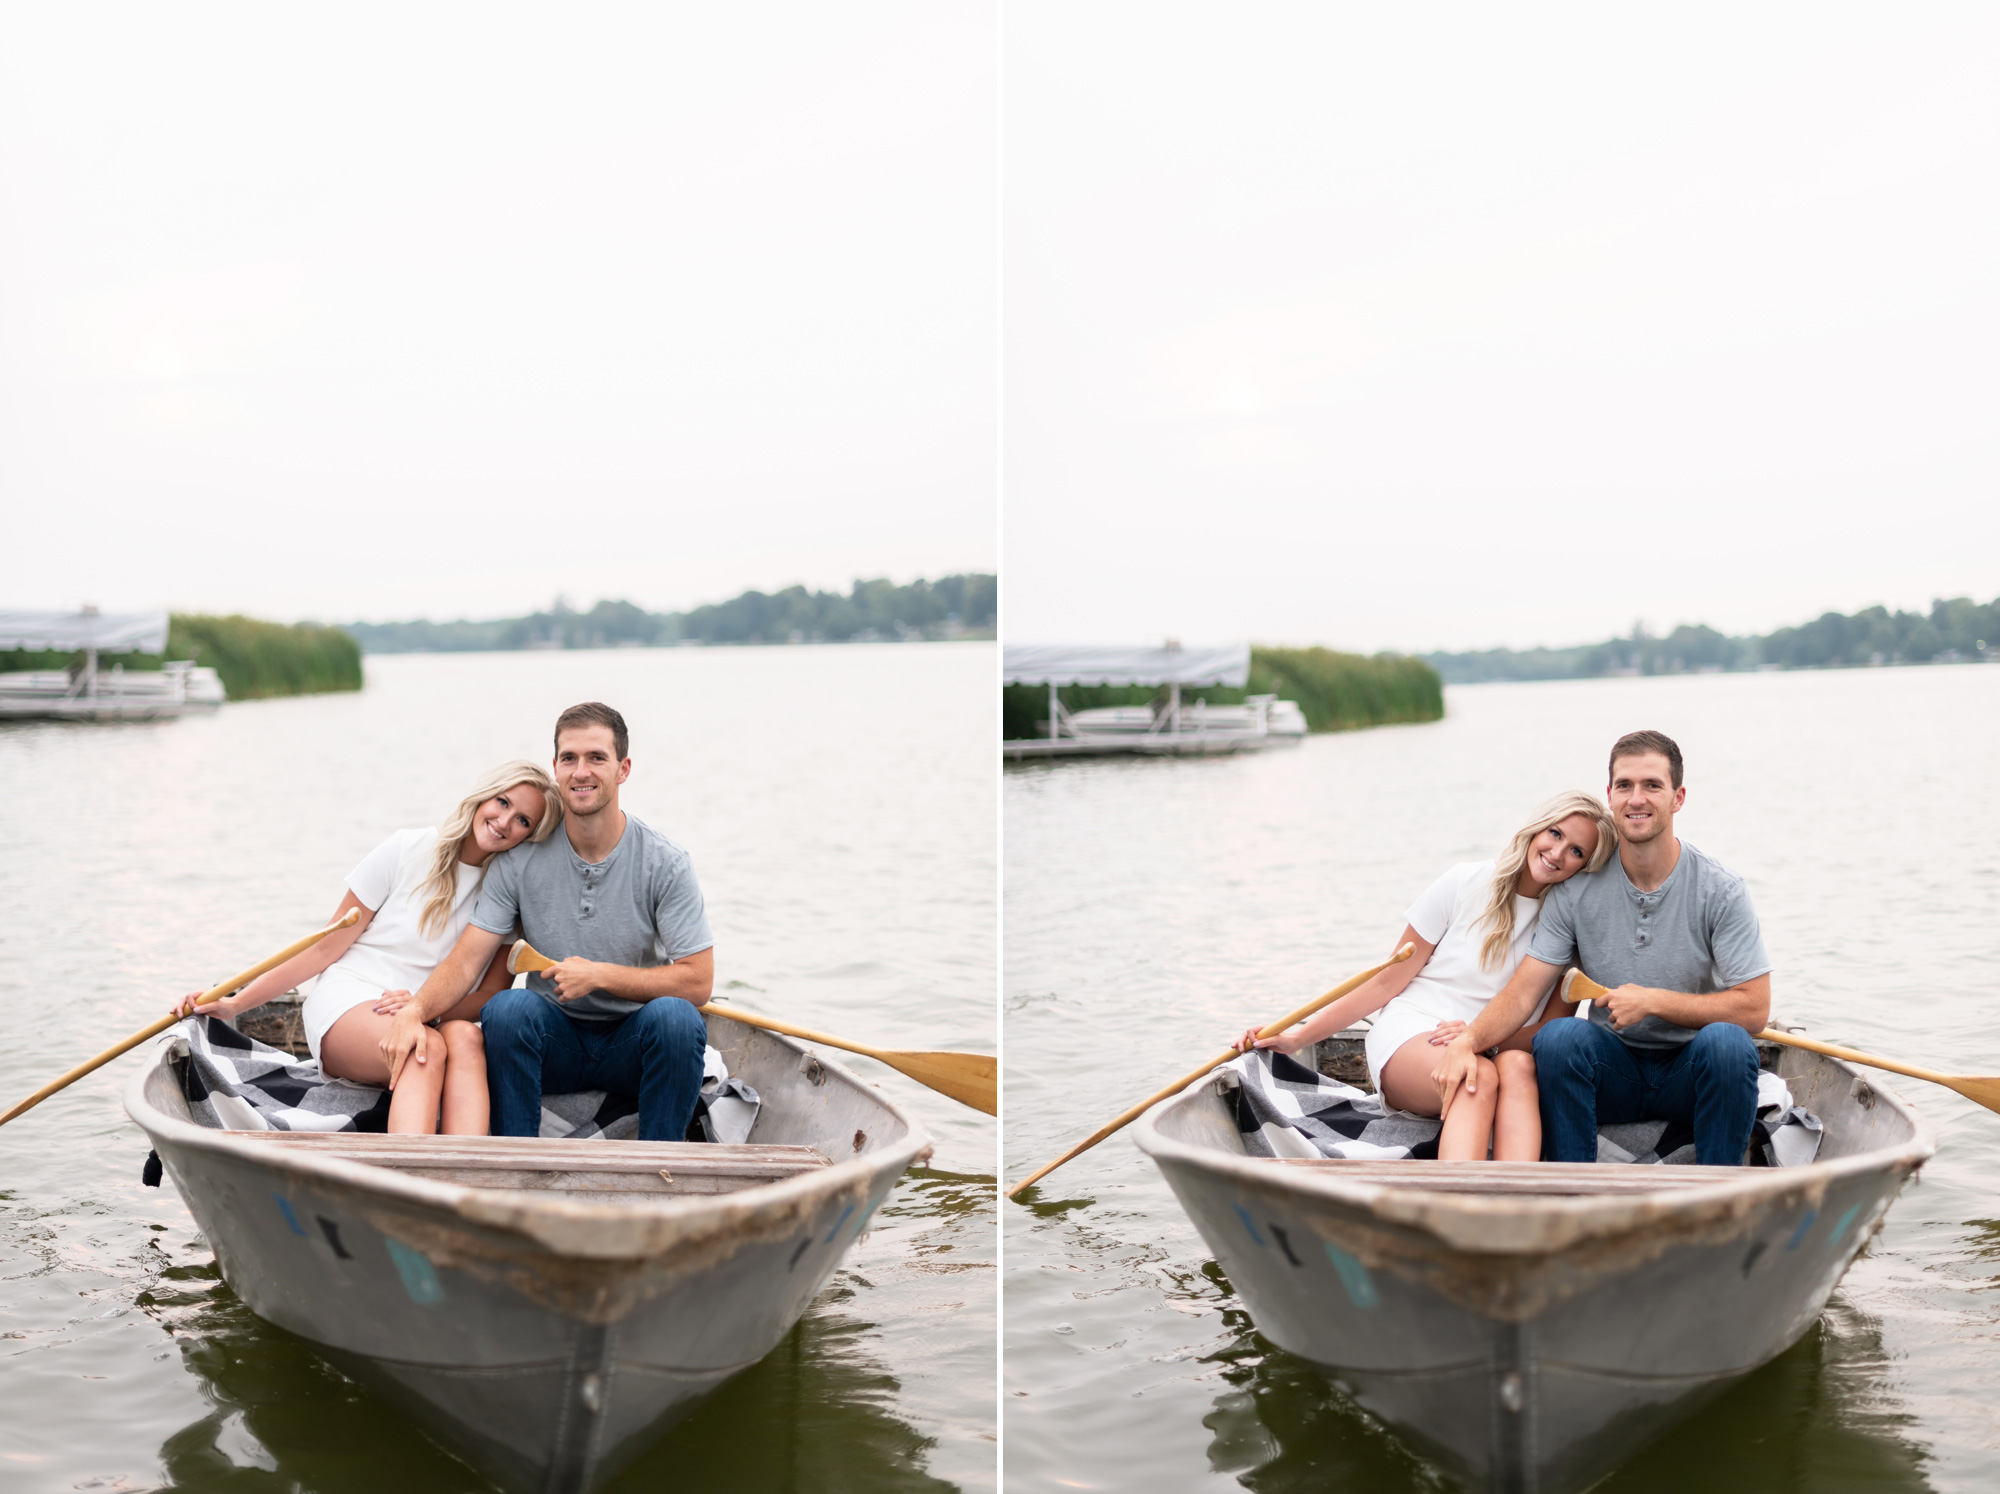 Engagement pictures in a canoe photographed by Layne Pfliiger - lake engagement - canoe engagement - lake photoshoot - lake engagement shoot - canoe